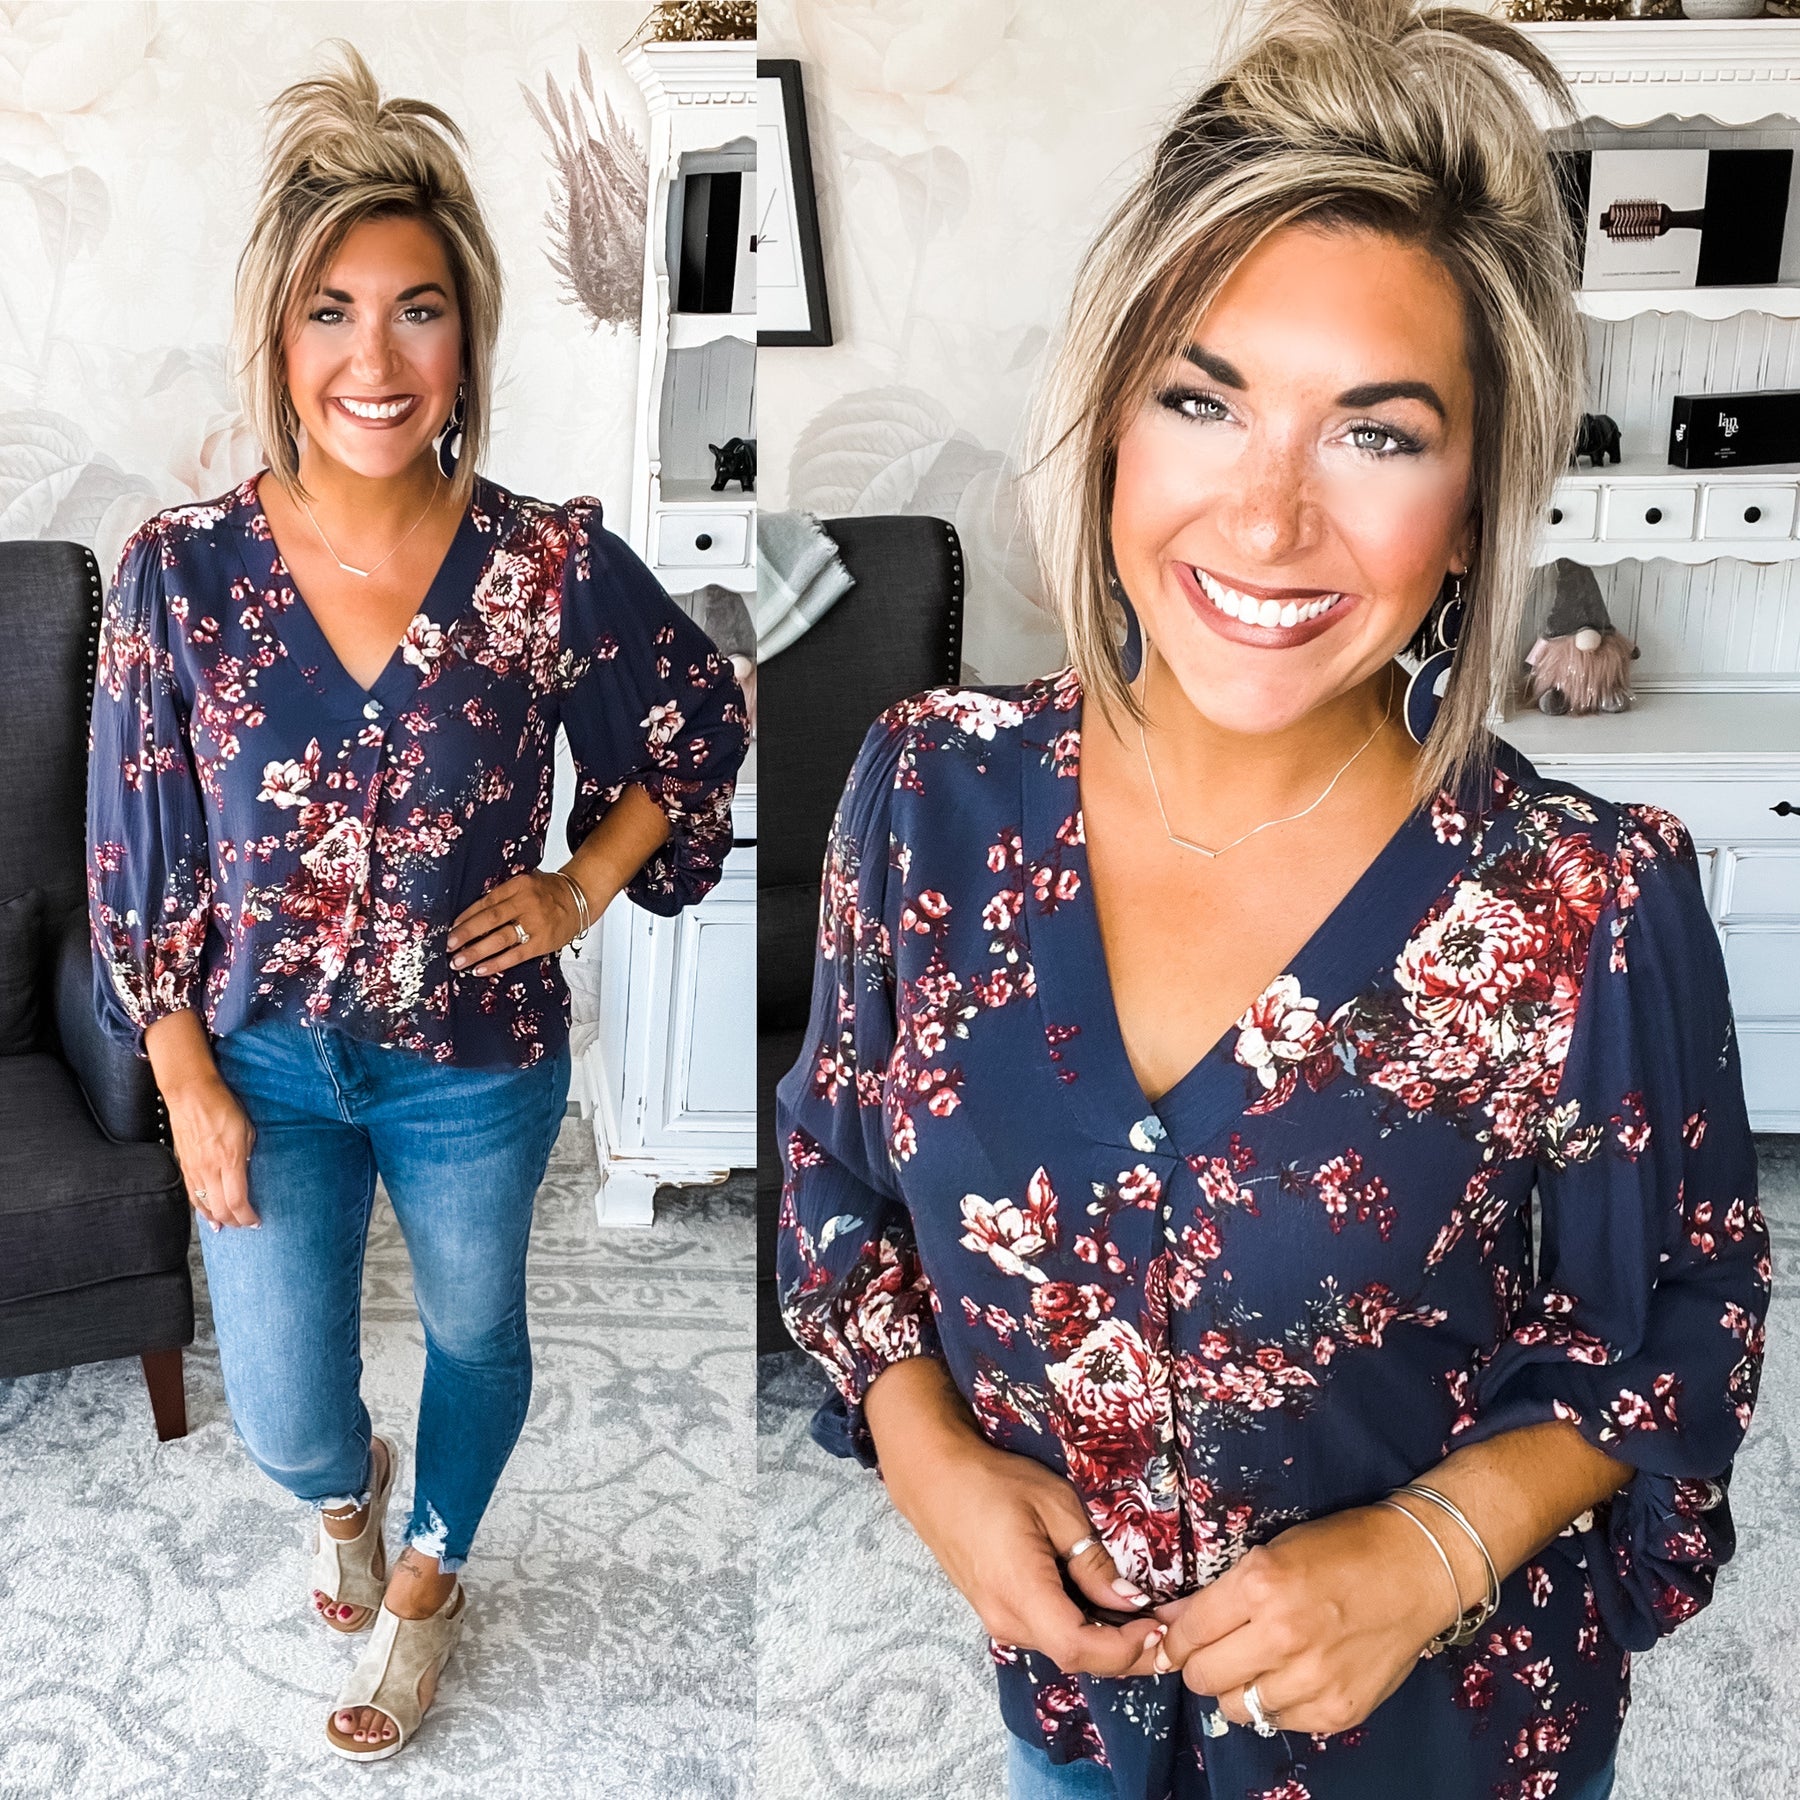 Find Your Way Floral Blouse